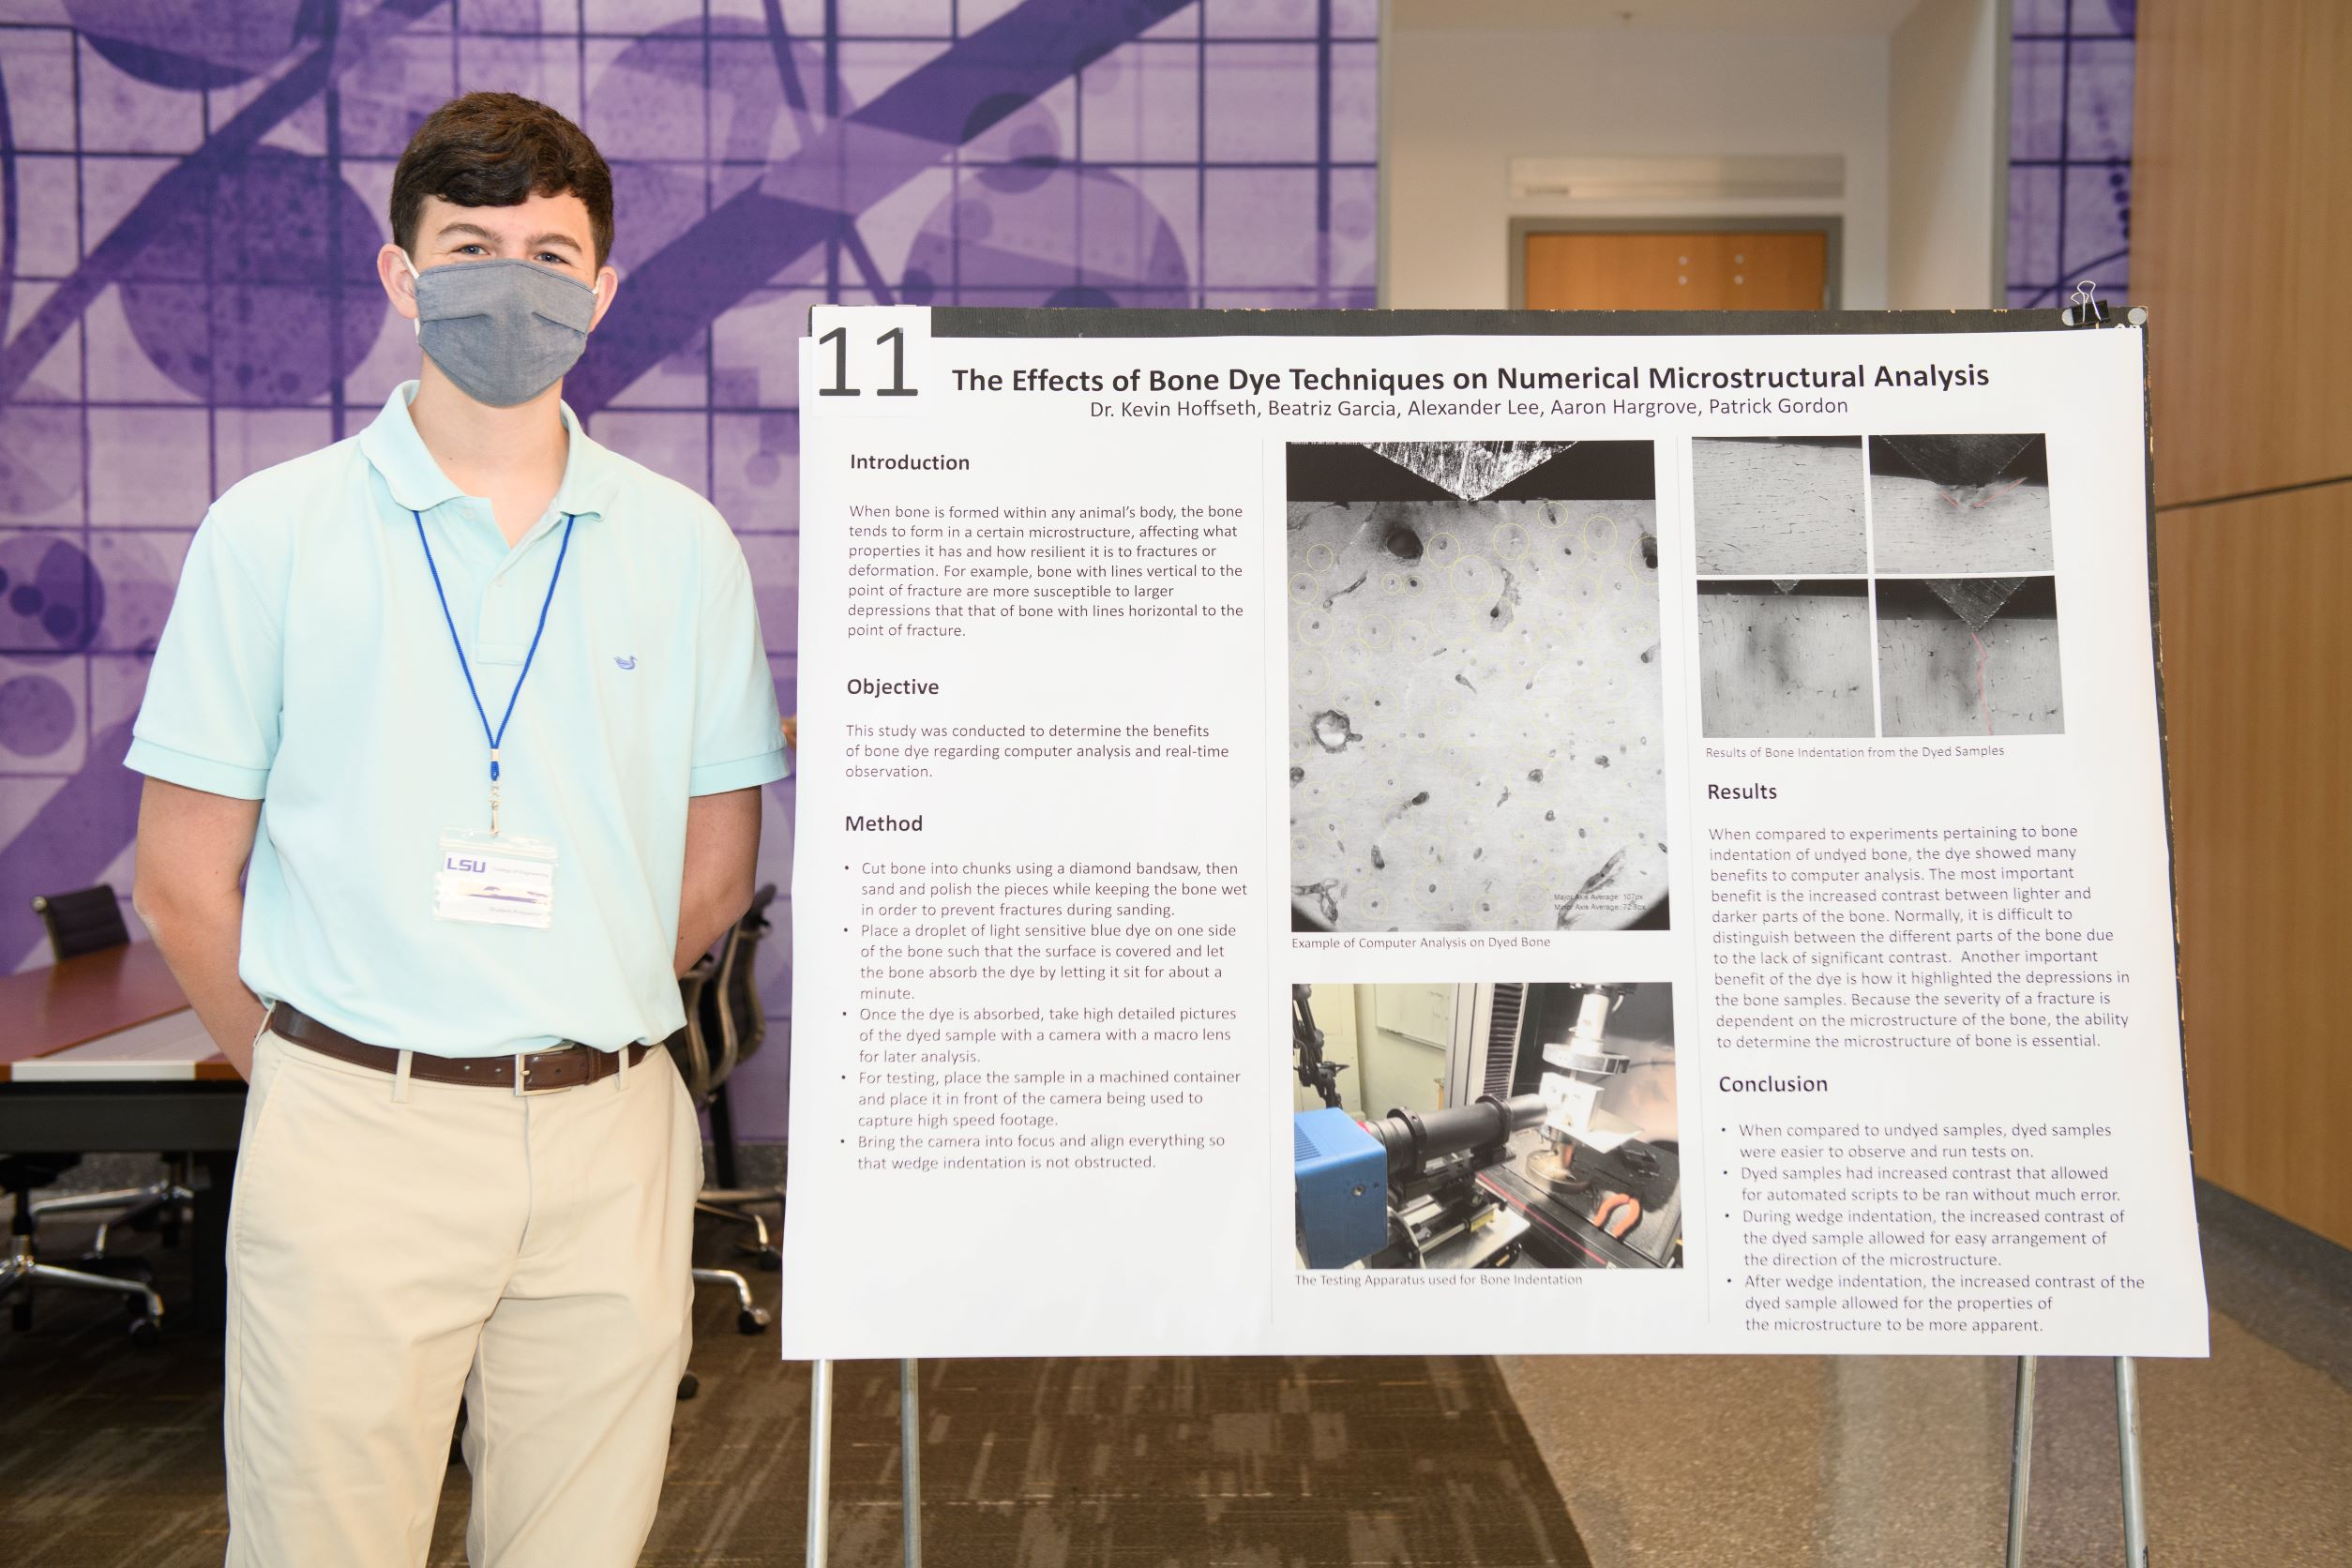 Student in blue shirt posing with poster presentation